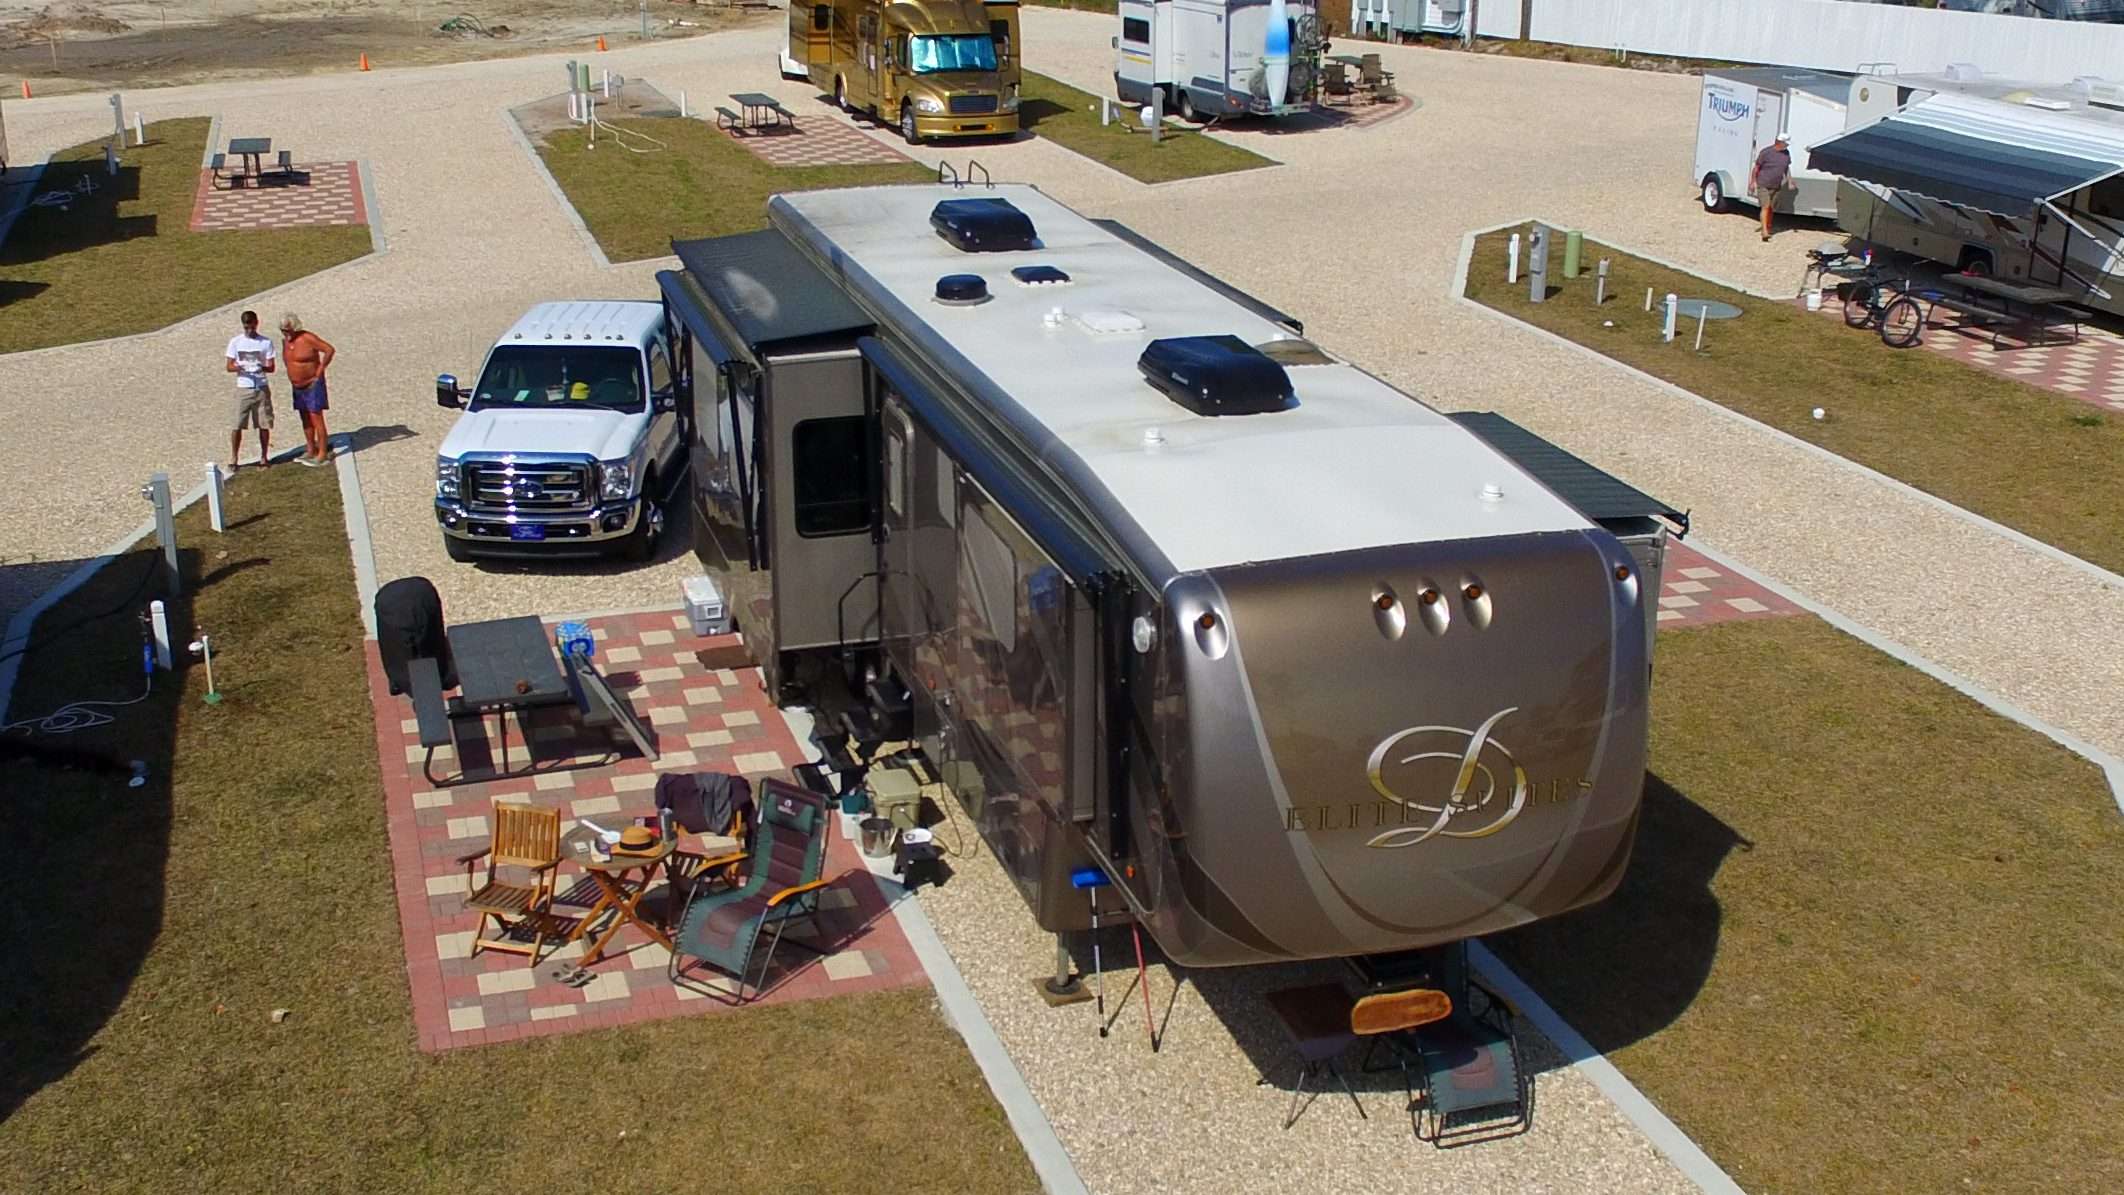 Aerial image of RV parked. Heat pumps installed on the roof of the RV.